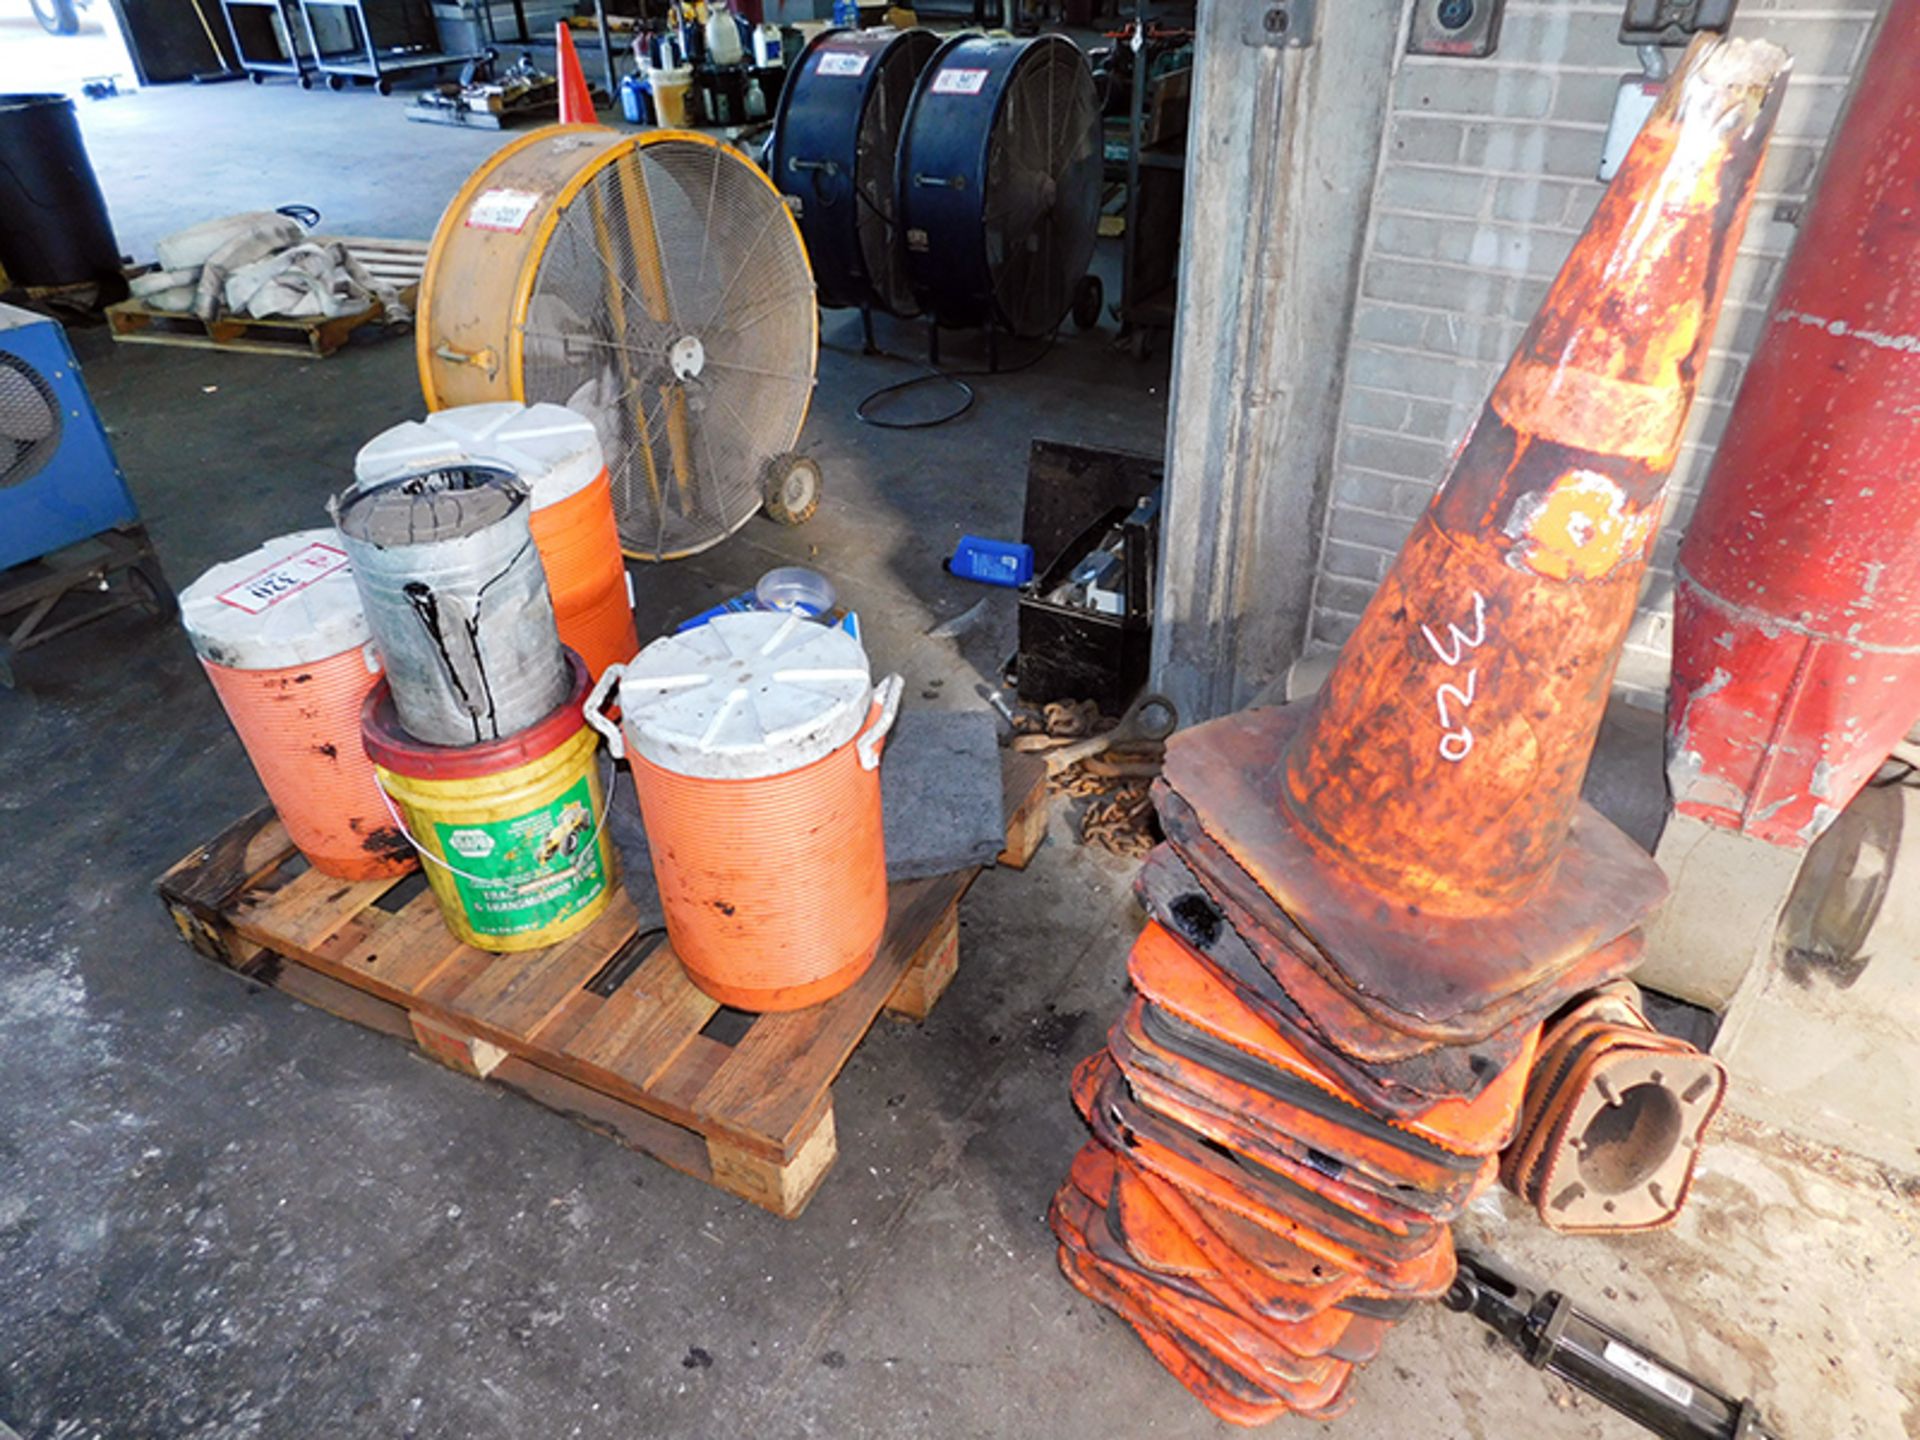 Contents of Pallet - Misc Safety & Roadwork Signs, Safety Cones, Insulated Drink Dispensers, etc.